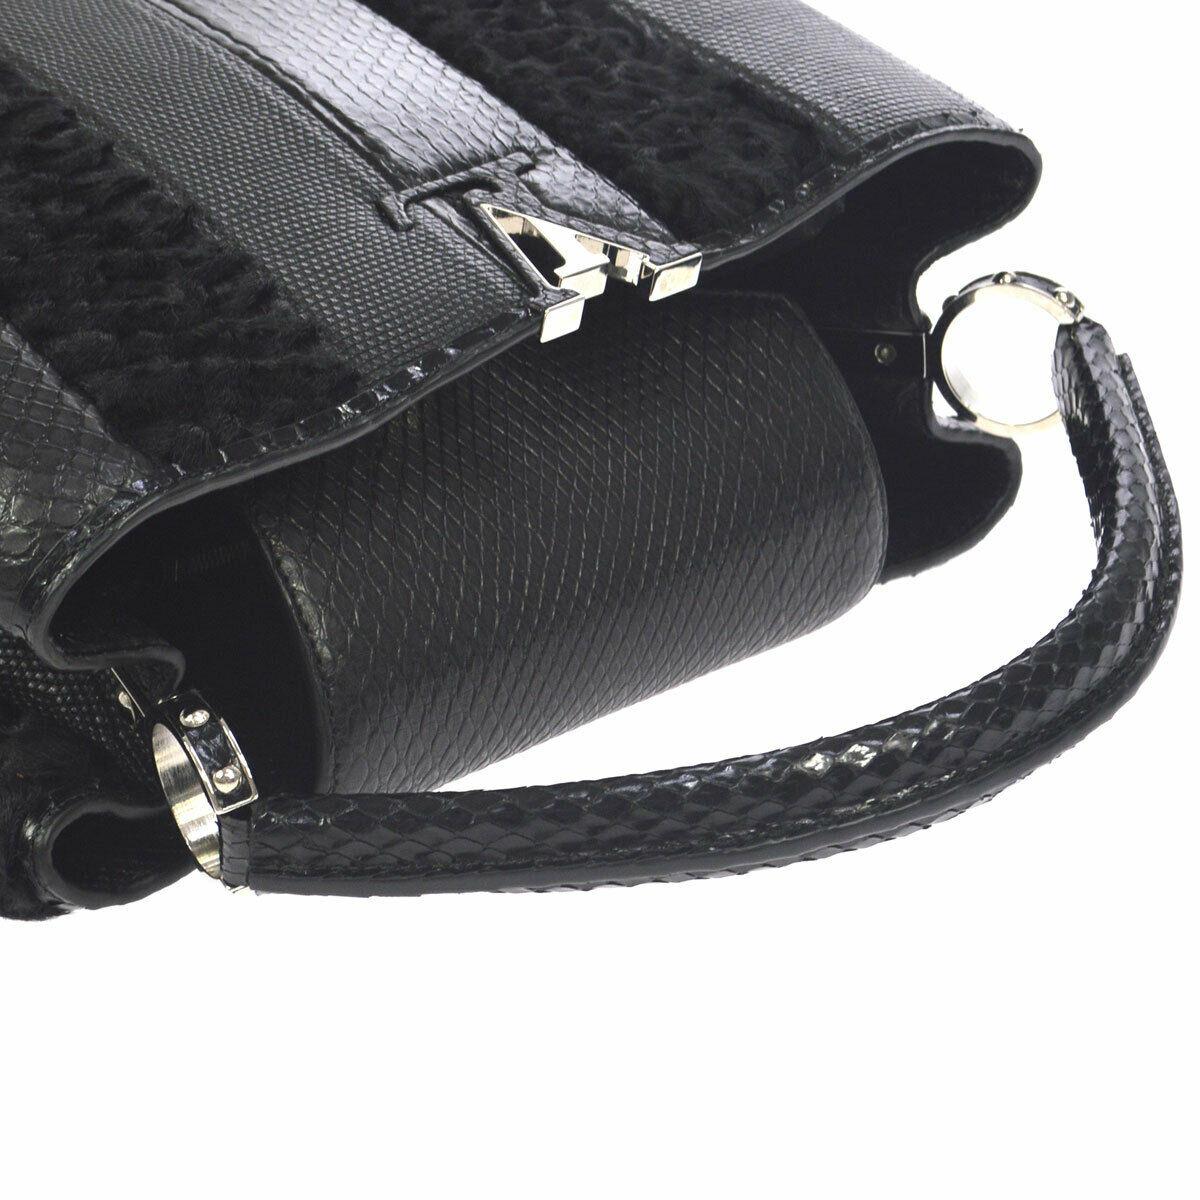 Louis Vuitton Black Lizard Crocodile Exotic Silver Top handle Satchel Bag in Box

Crocodile
Lizard
Leather
Silver tone hardware
Leather lining
Date code present
Made in France
Handle drop 5